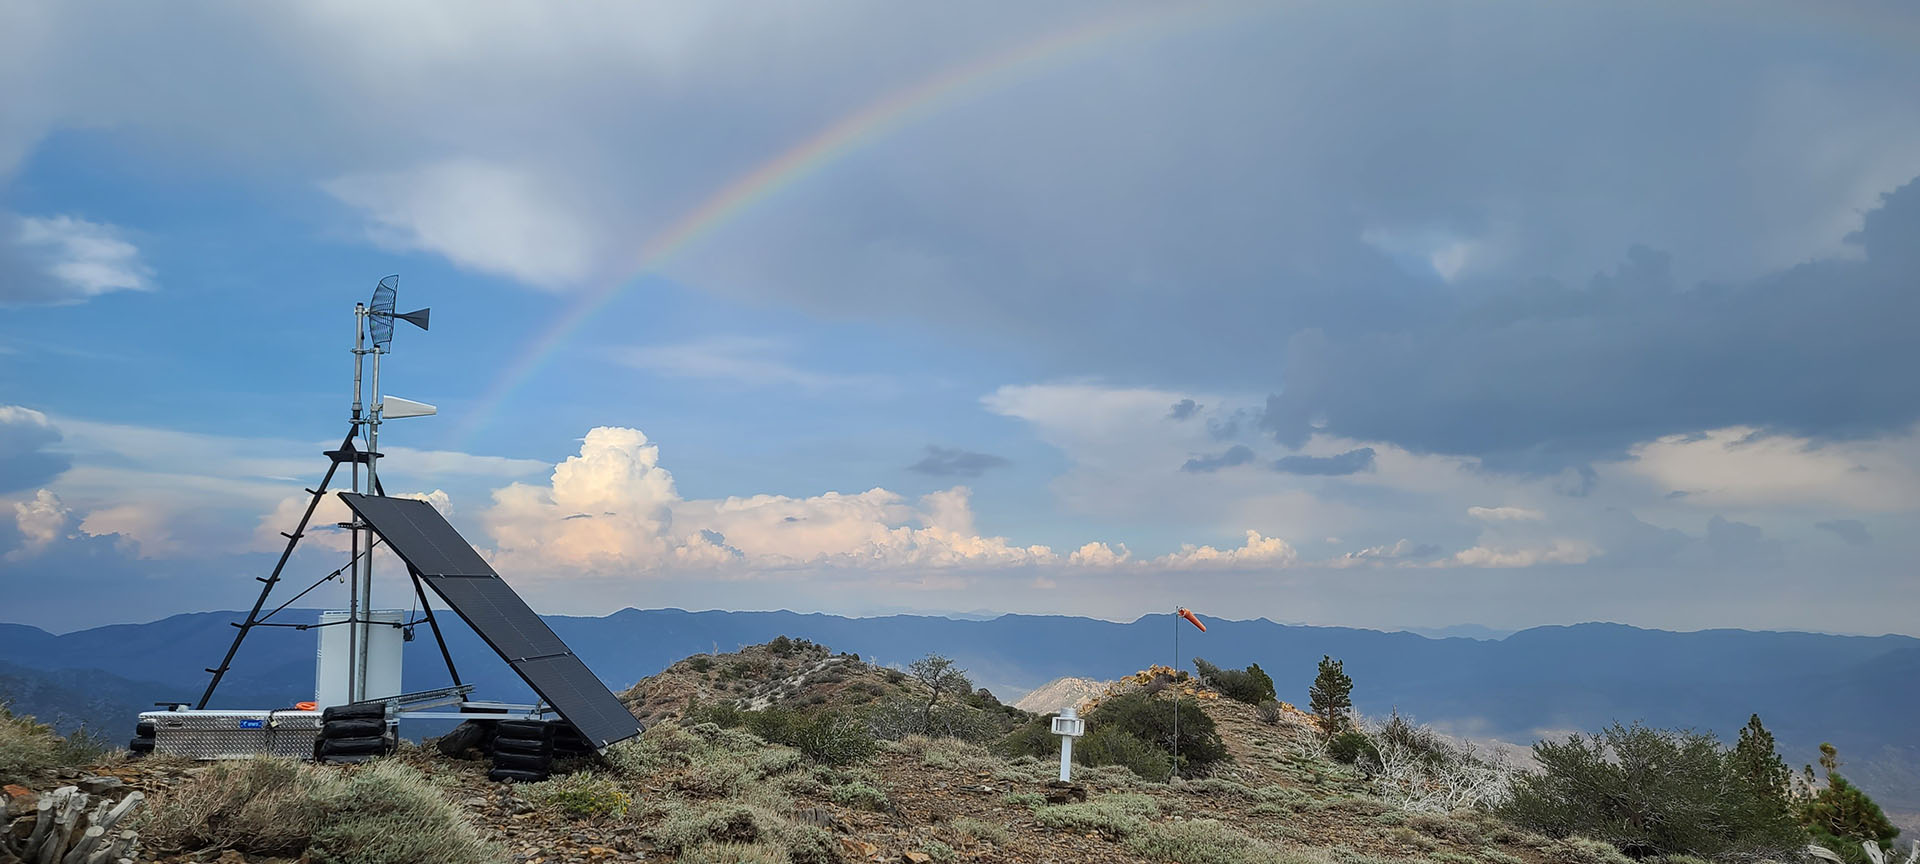 Solar powered camera on top of Bald Mountain, with a rainbow in the background